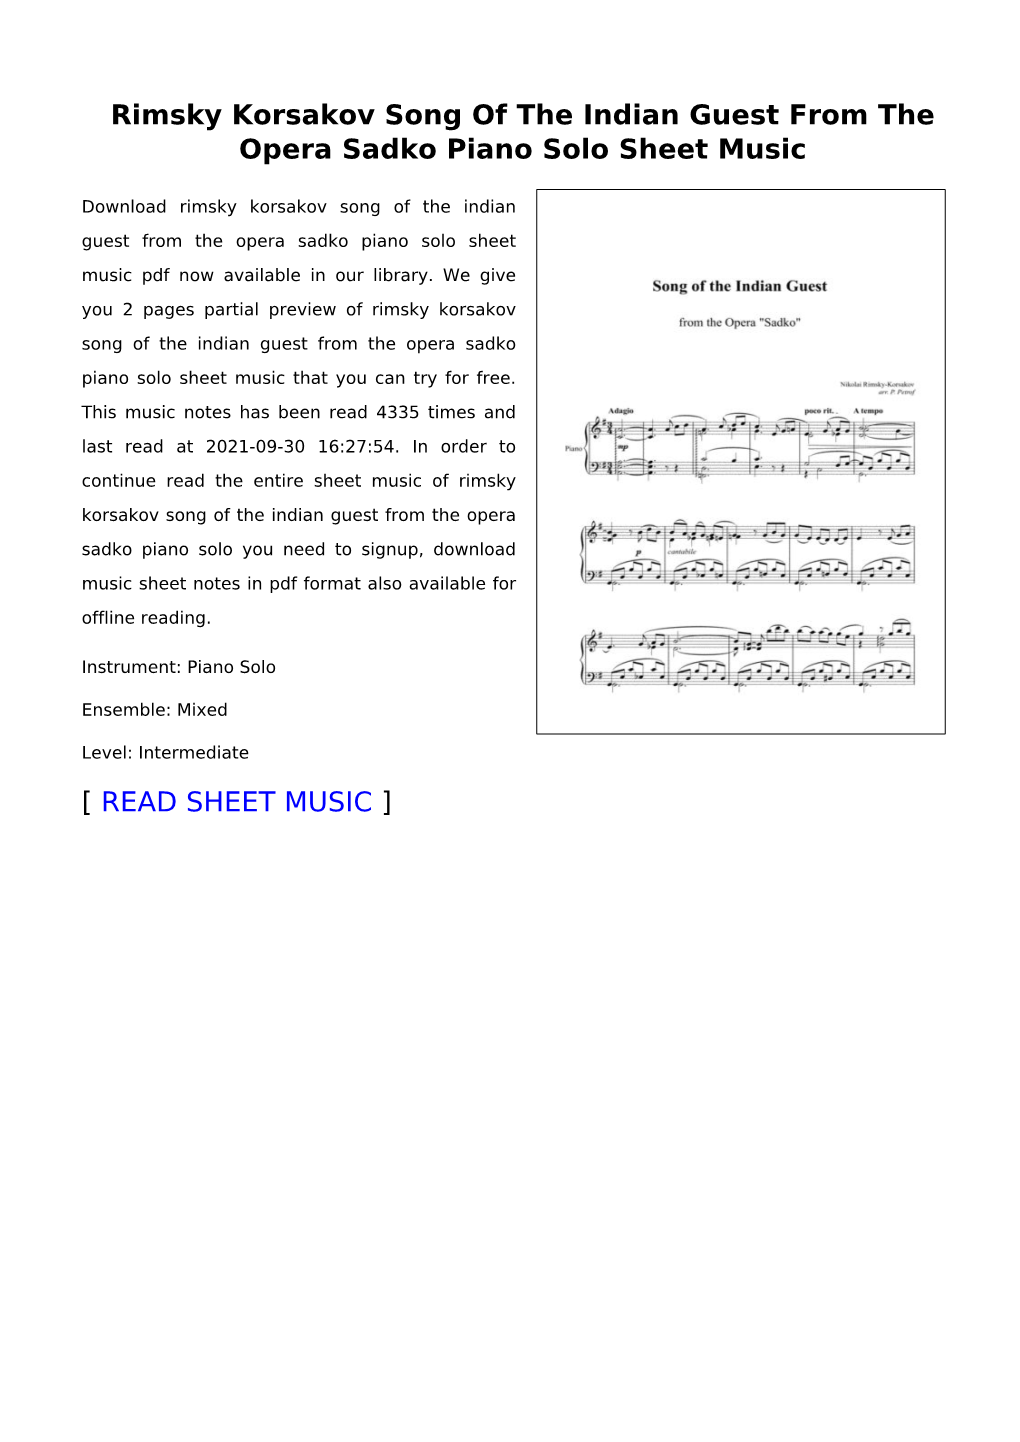 Rimsky Korsakov Song of the Indian Guest from the Opera Sadko Piano Solo Sheet Music